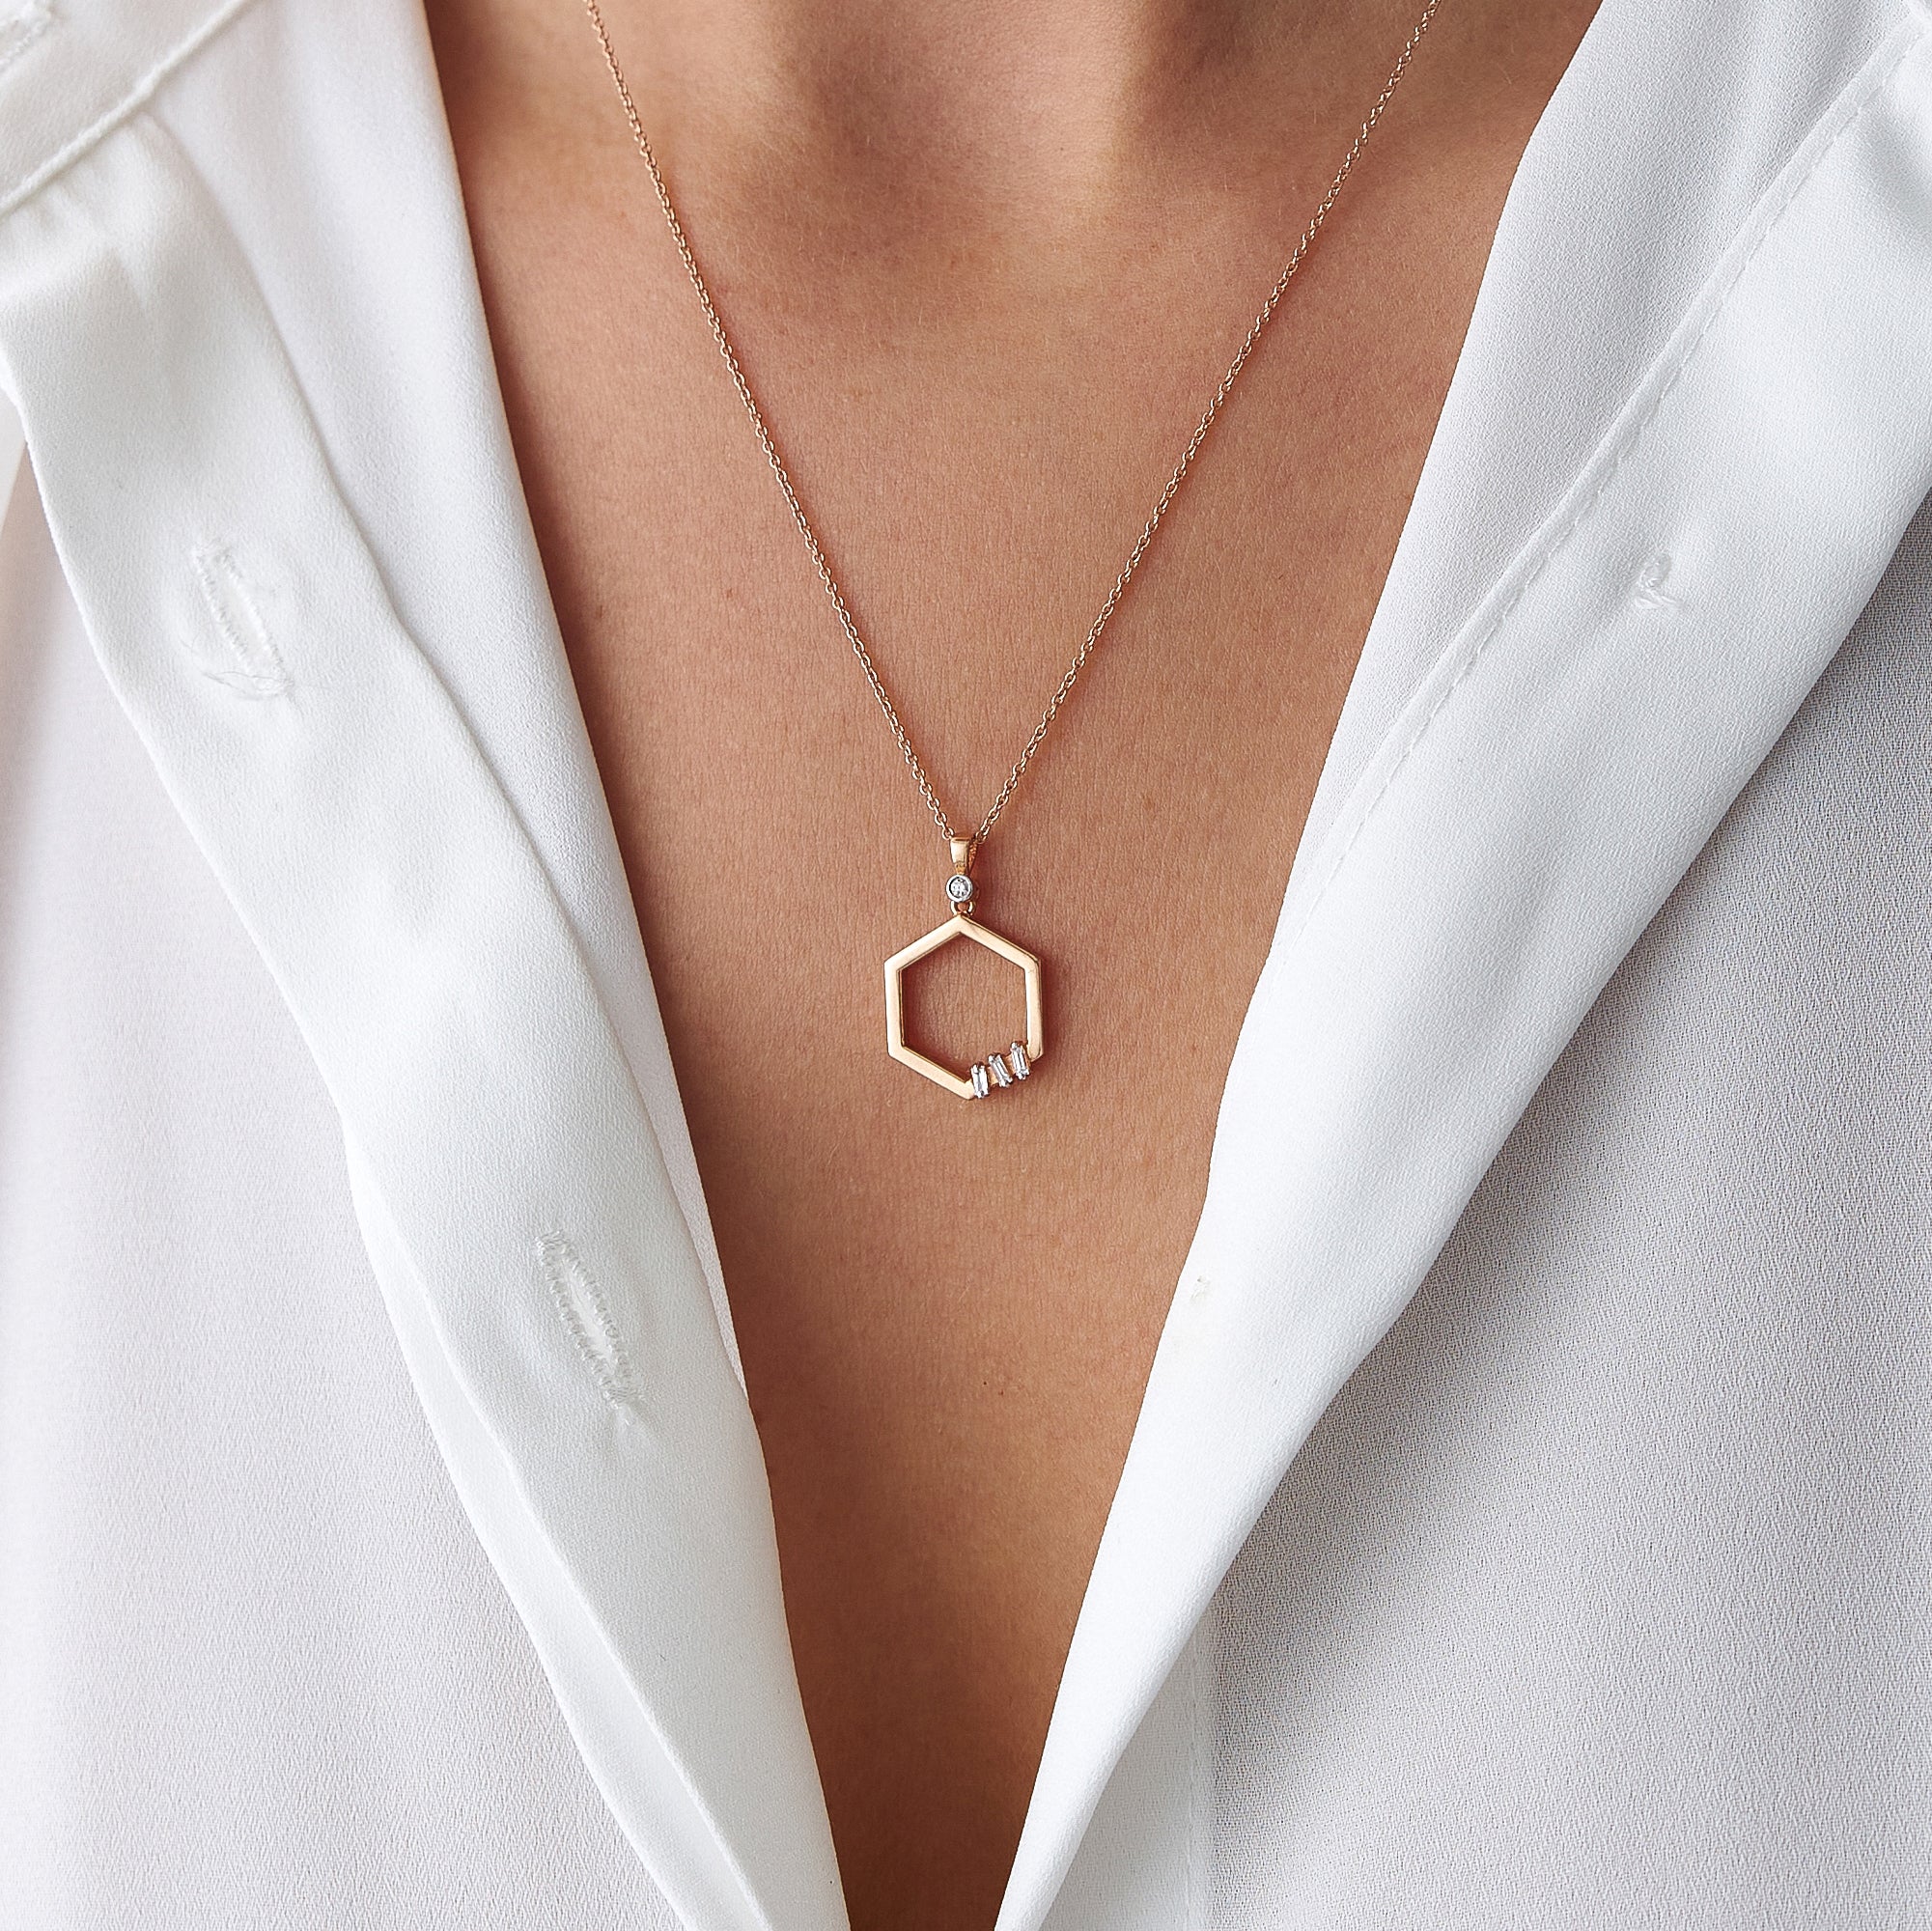 Diamond Hexagon Necklace Available in 14K and 18K Gold